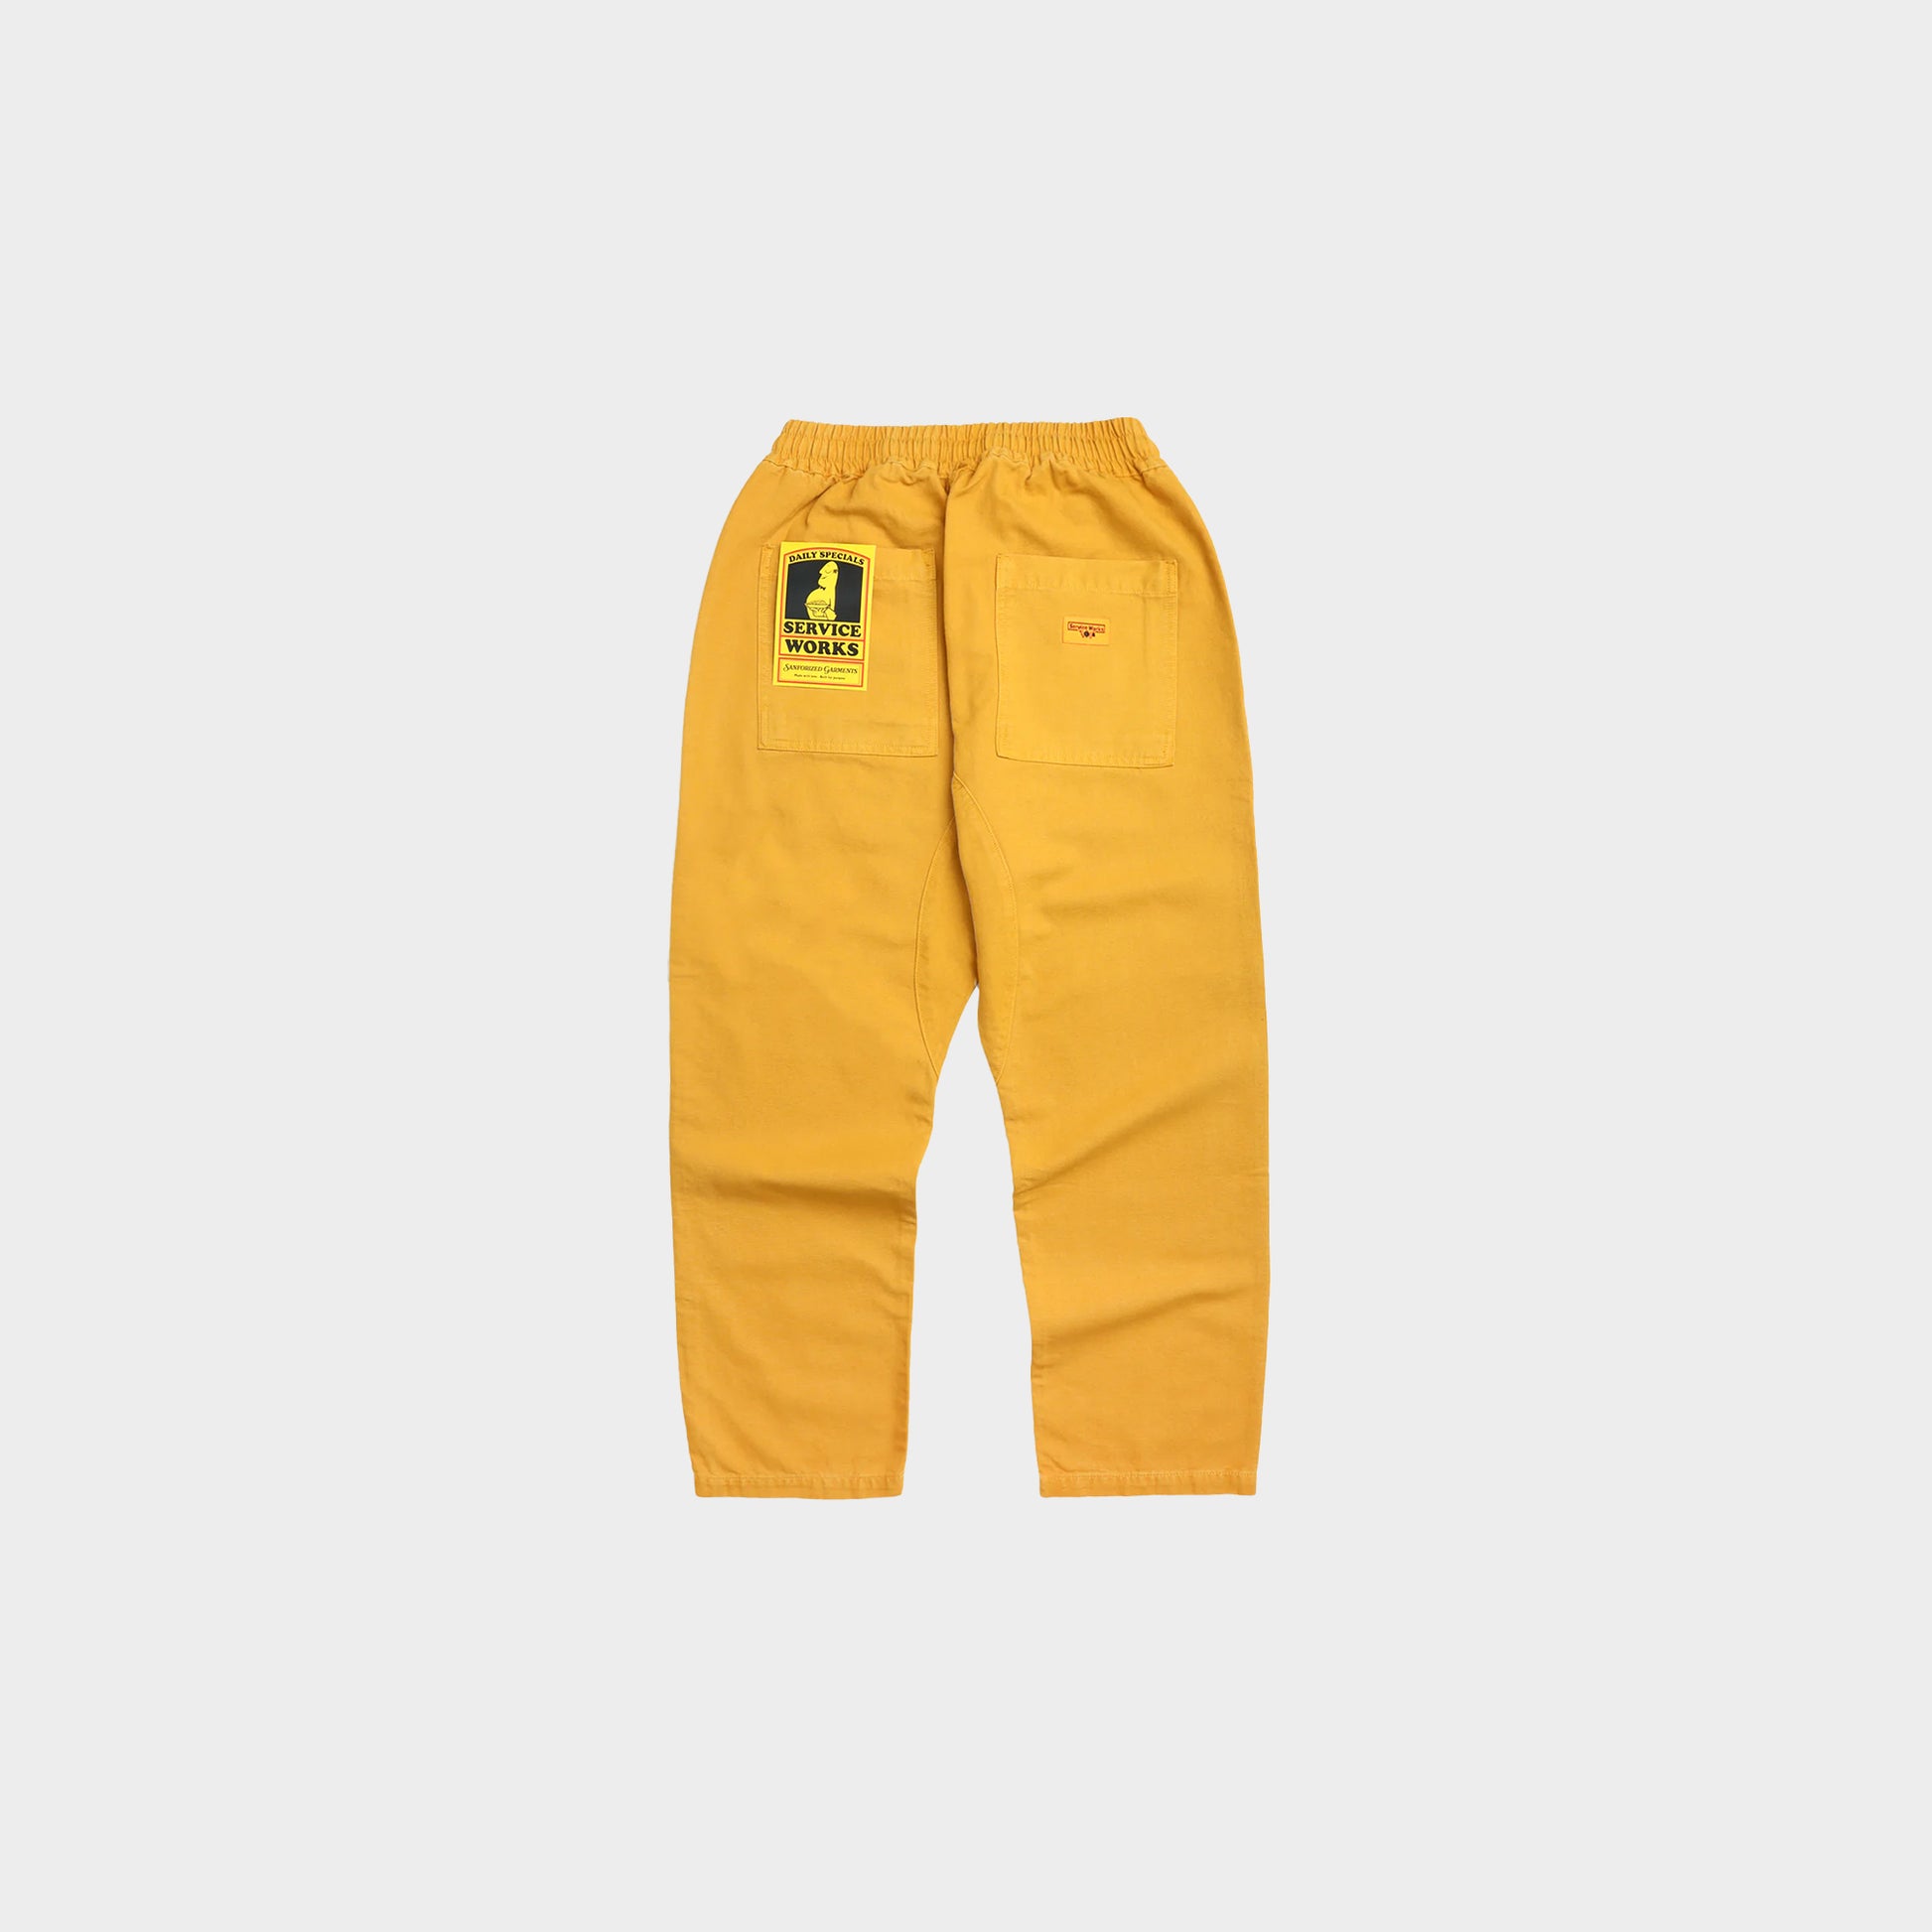 Service Works Canvas Chef Pants in der Farbe gold